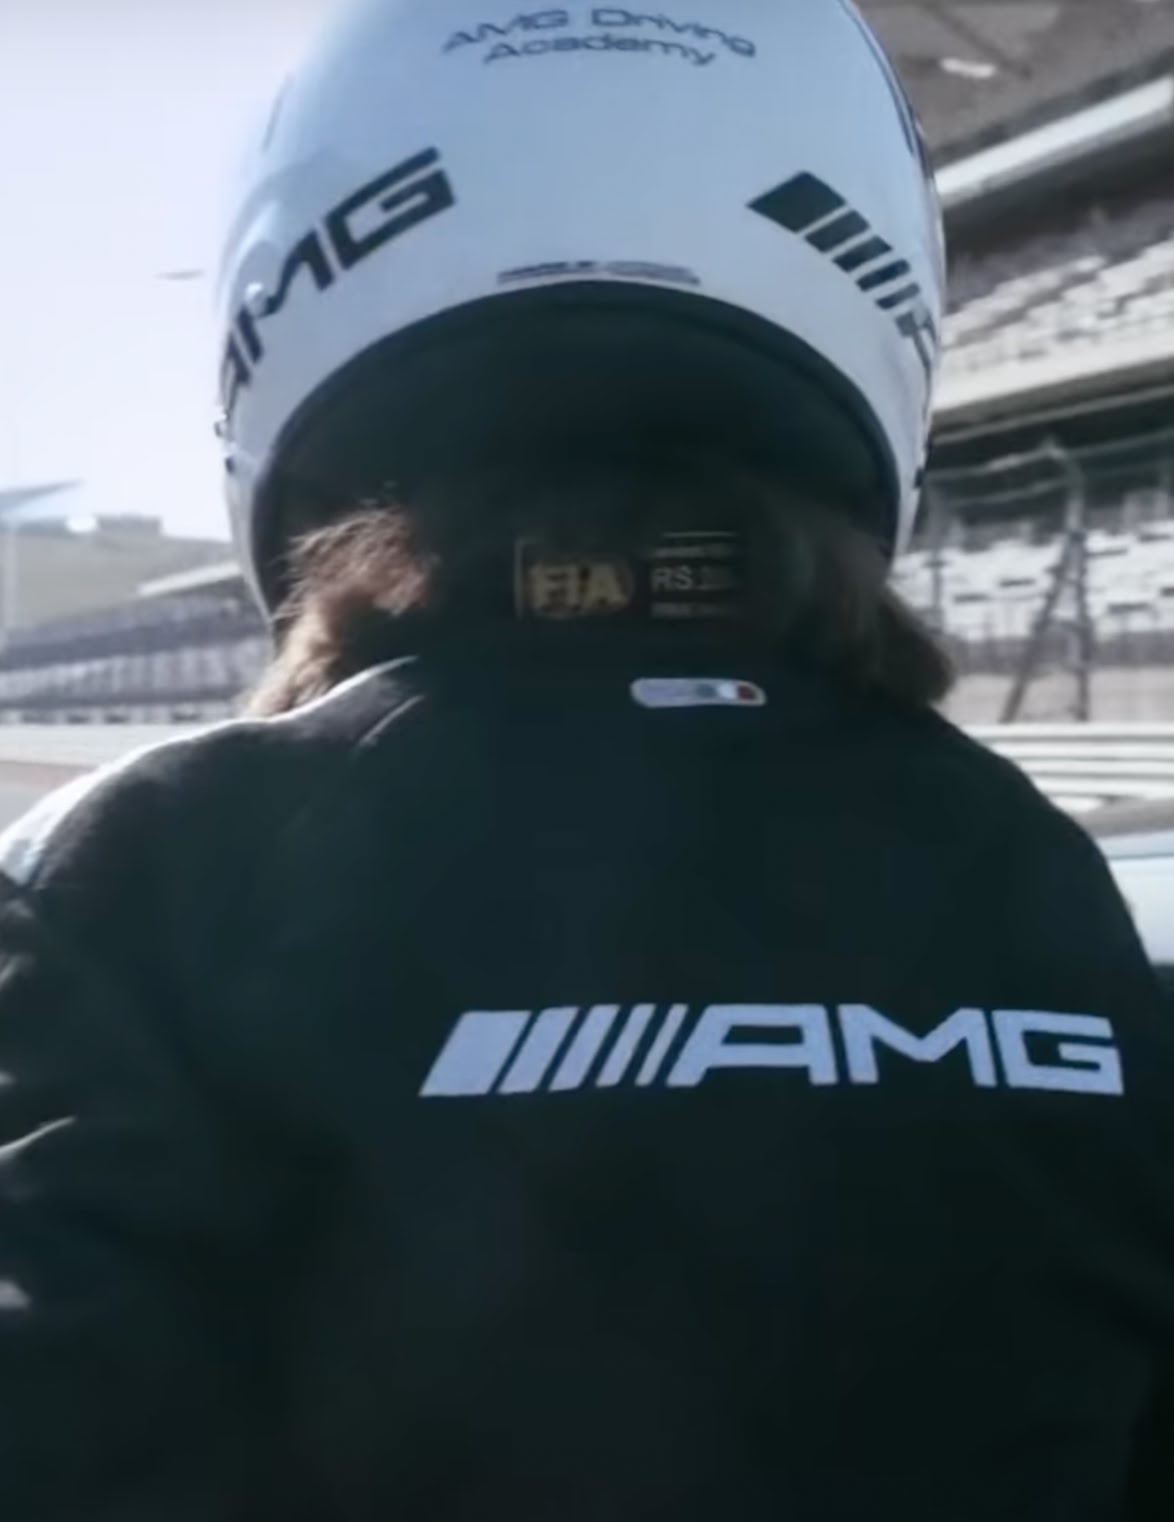 A photo of Debra Bennet, race driver, standing on the race track for Mercedes-AMG.